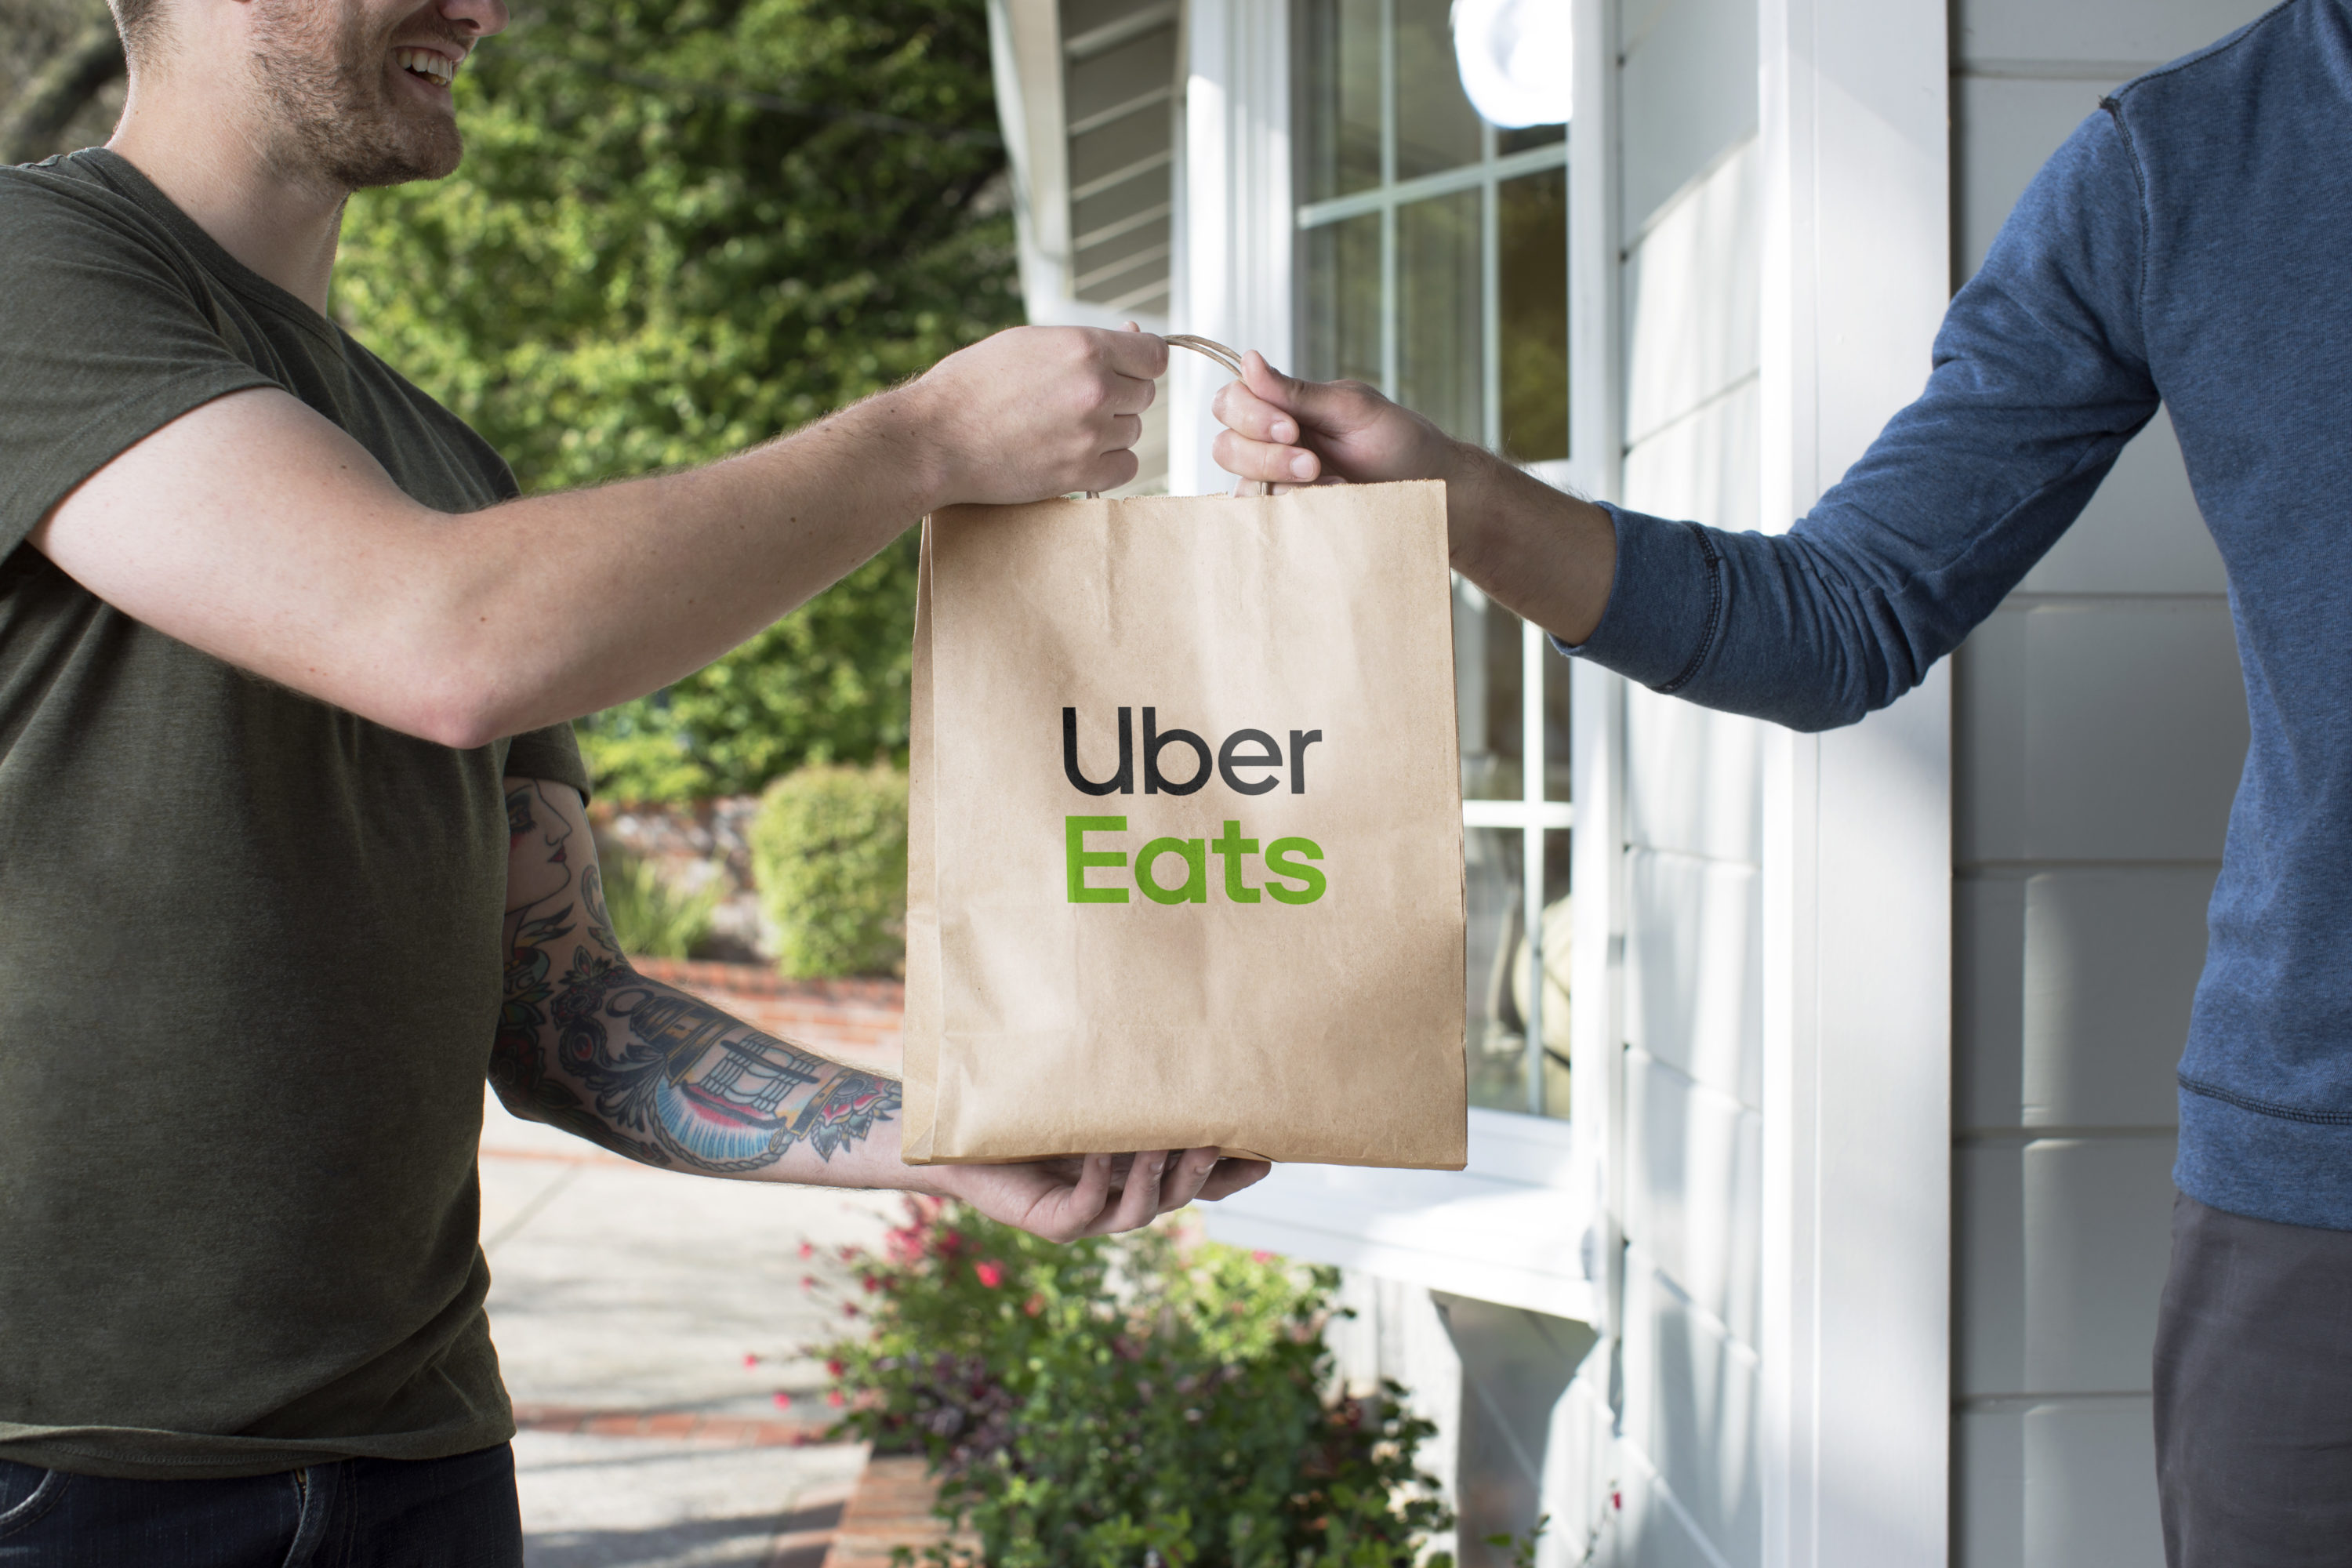 How To Change Phone Number On Uber Eats Account